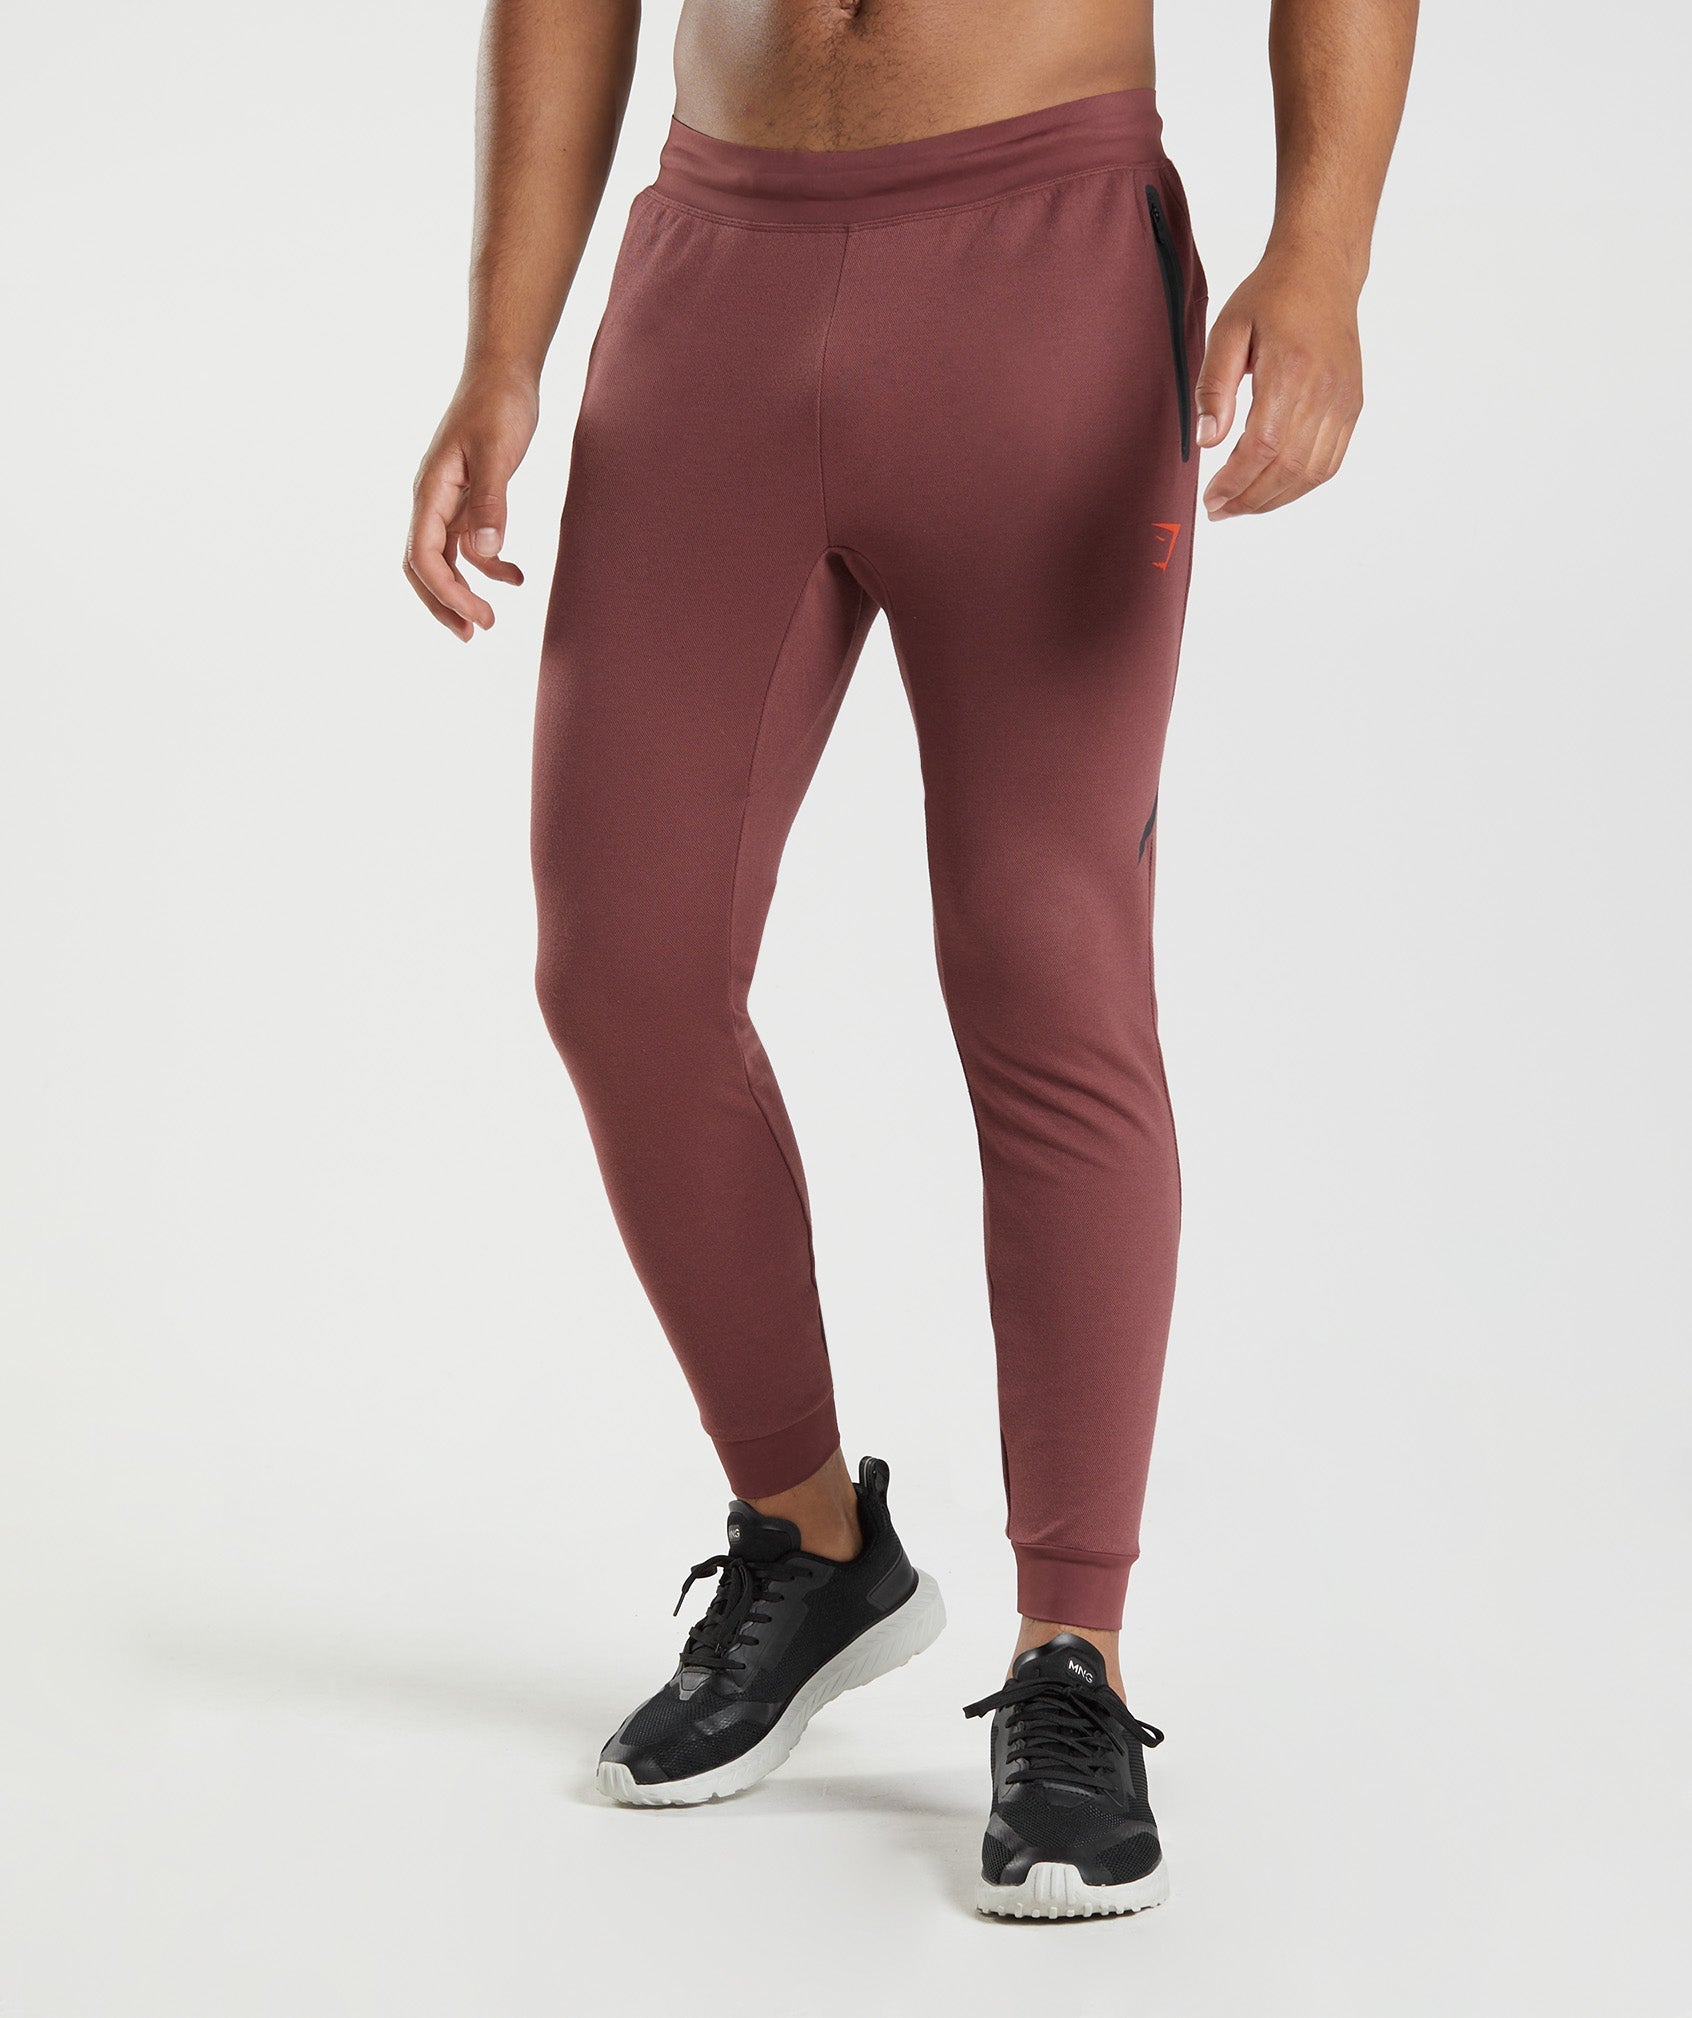 Apex Technical Joggers in Cherry Brown